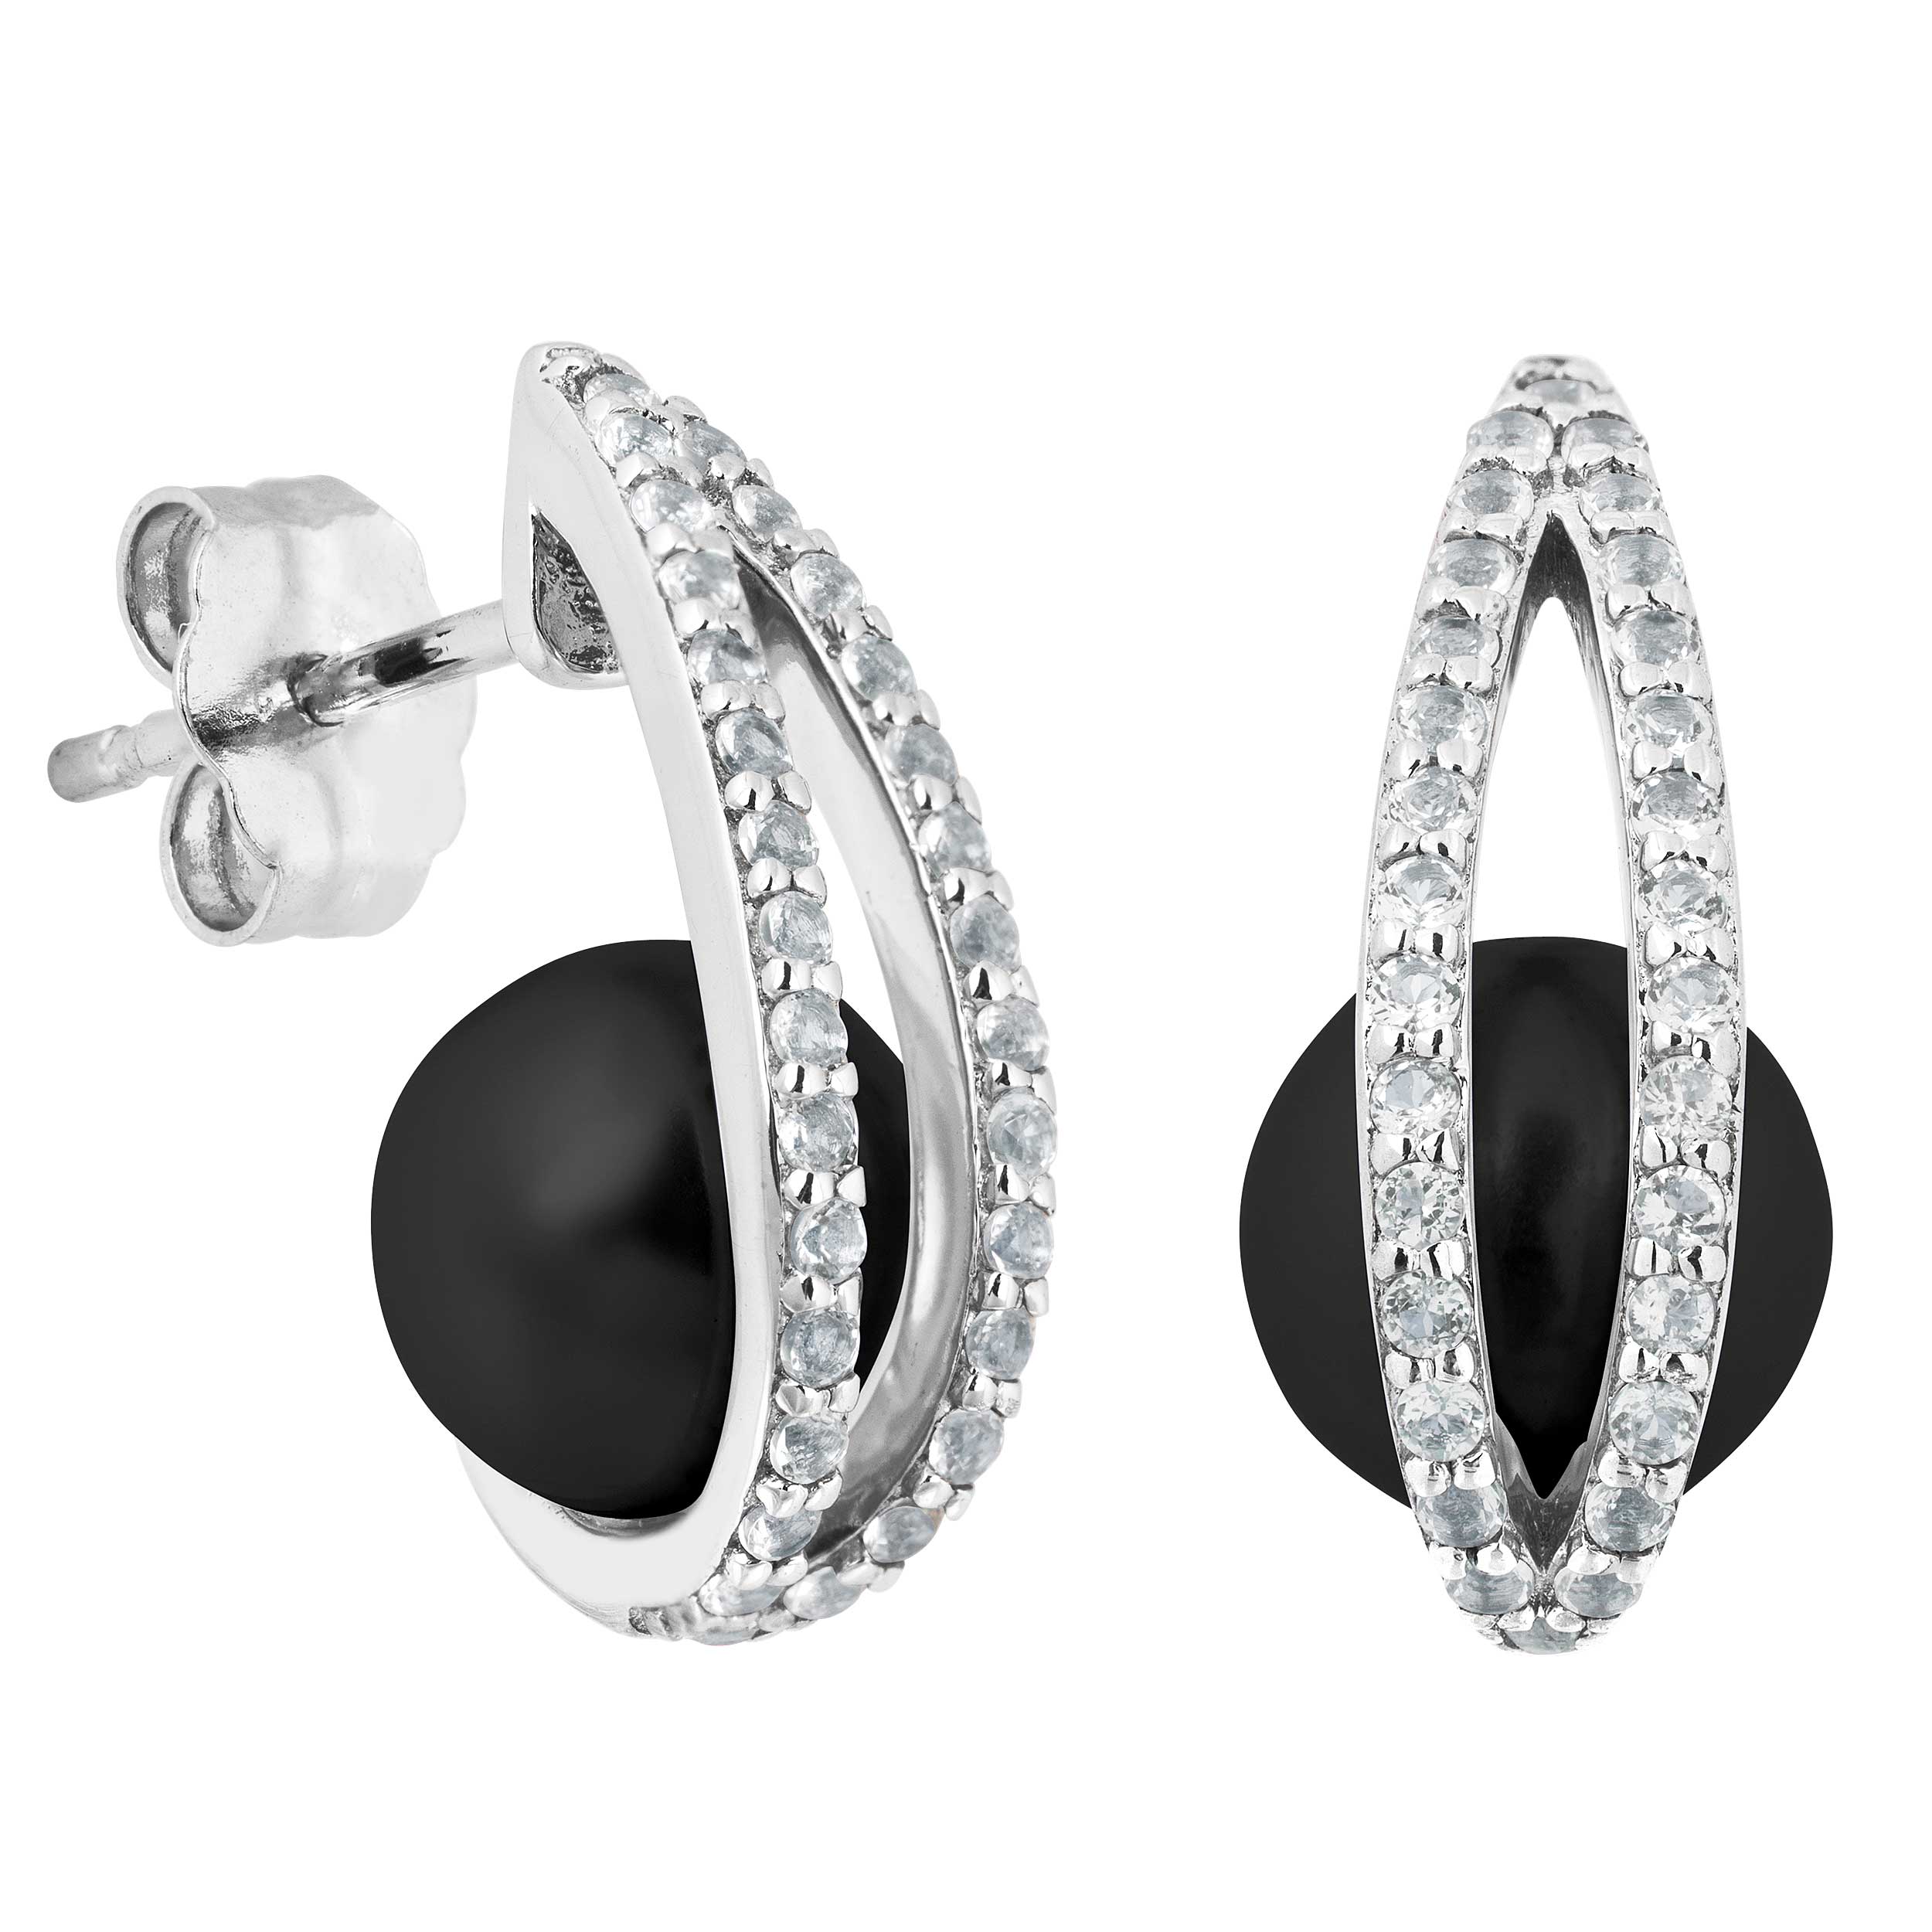 Round Black Onyx Earrings, Rhodium Plated Sterling Silver